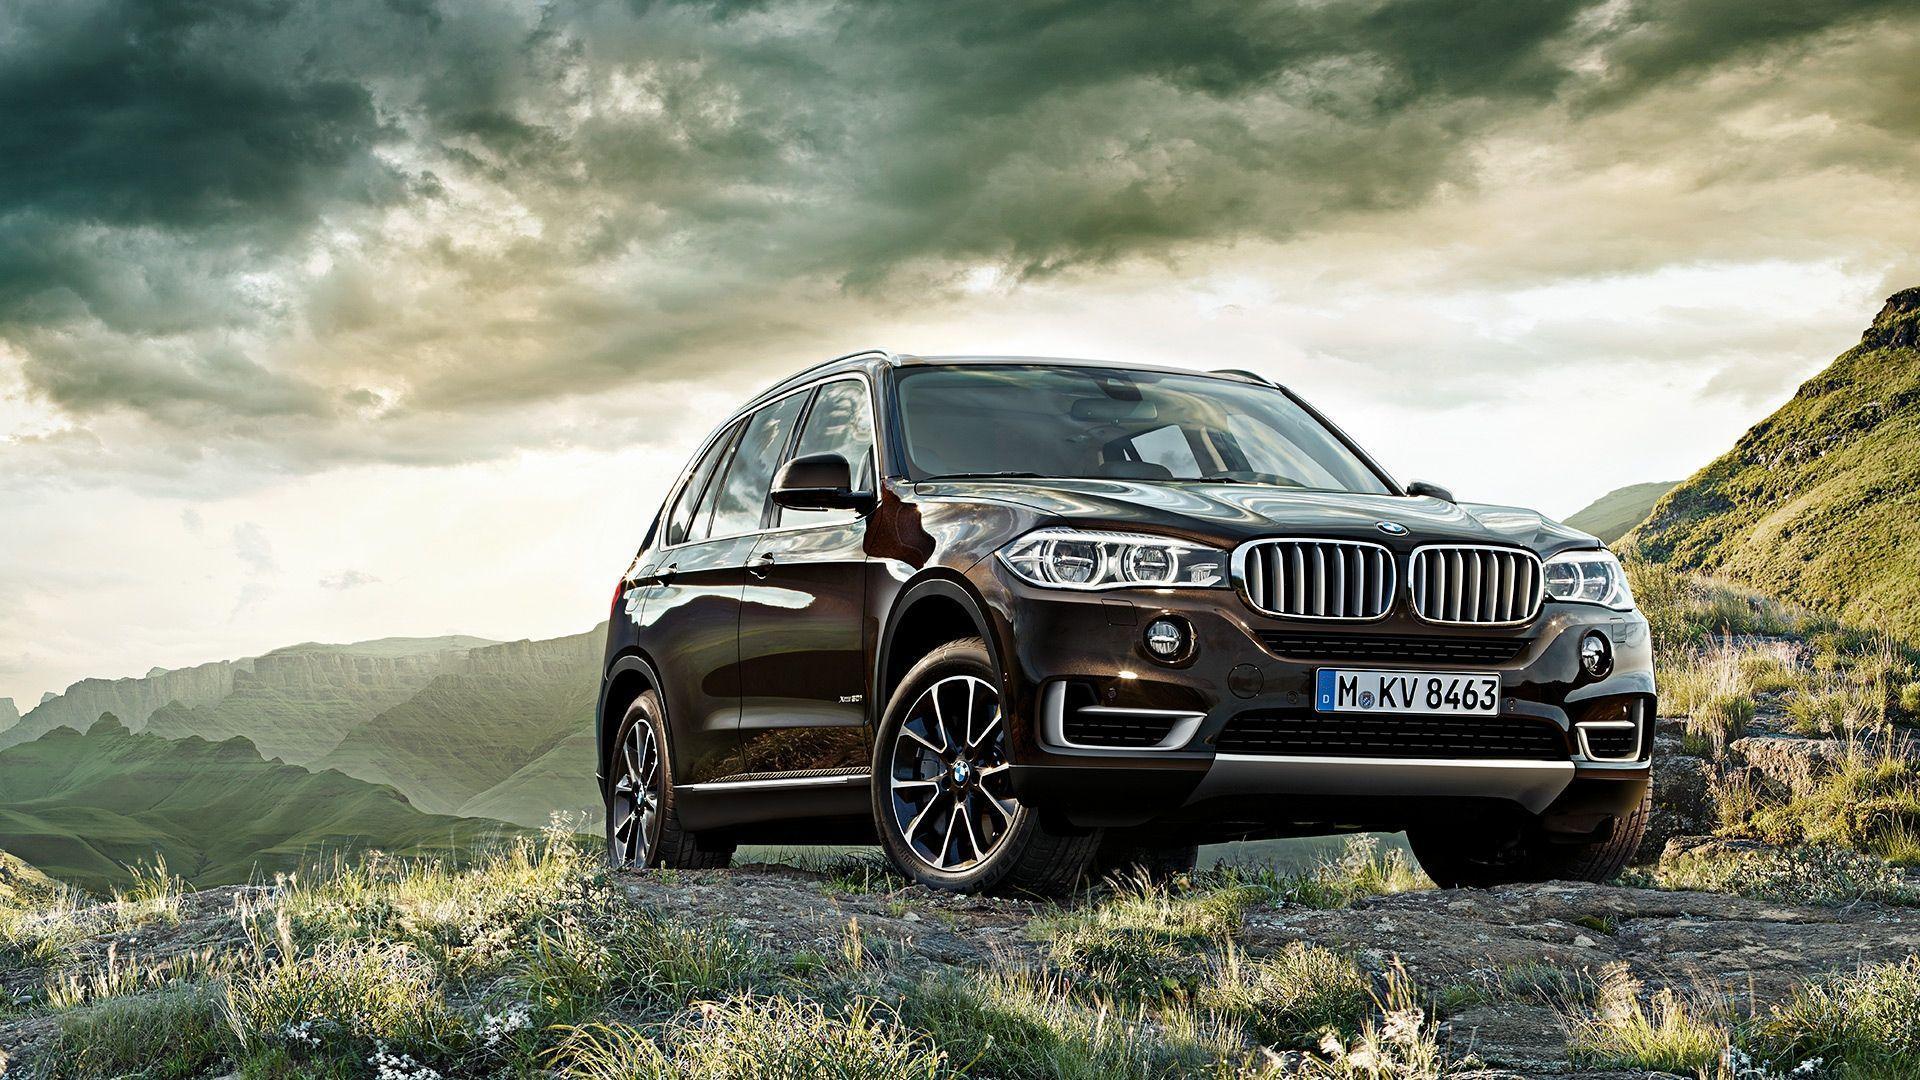 Bmw suv wallpapers